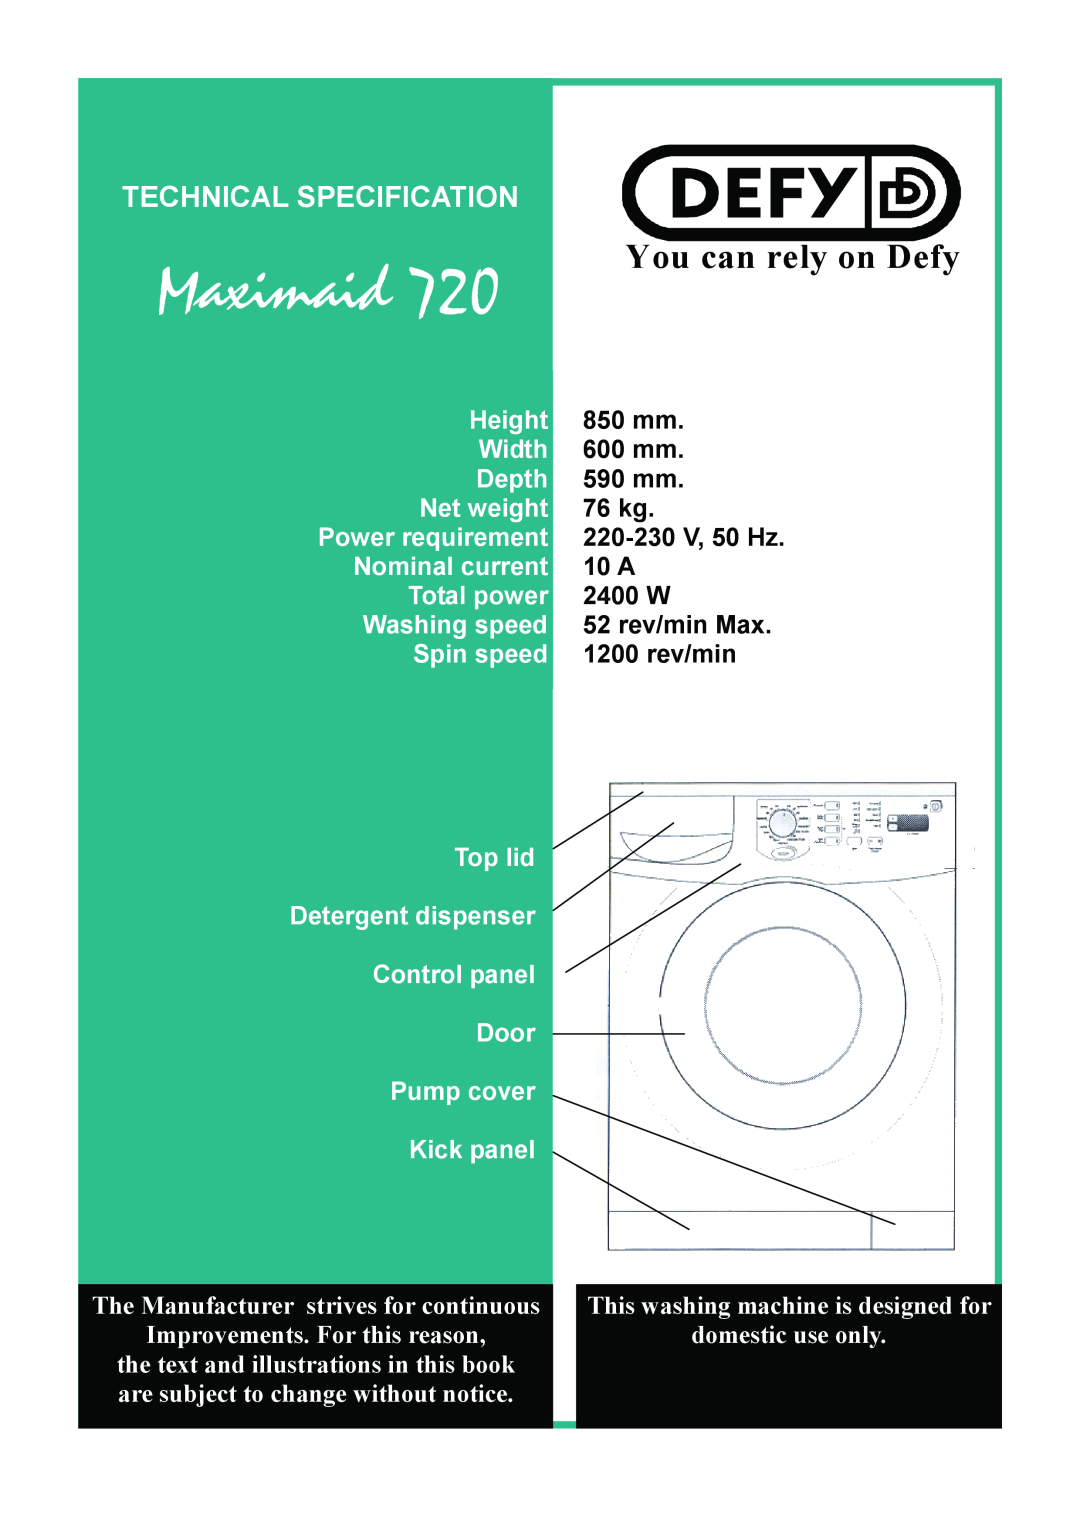 Defy Appliances 720W Maximaid, You can rely on Defy, Technical Specification, The Manufacturer strives for continuous 